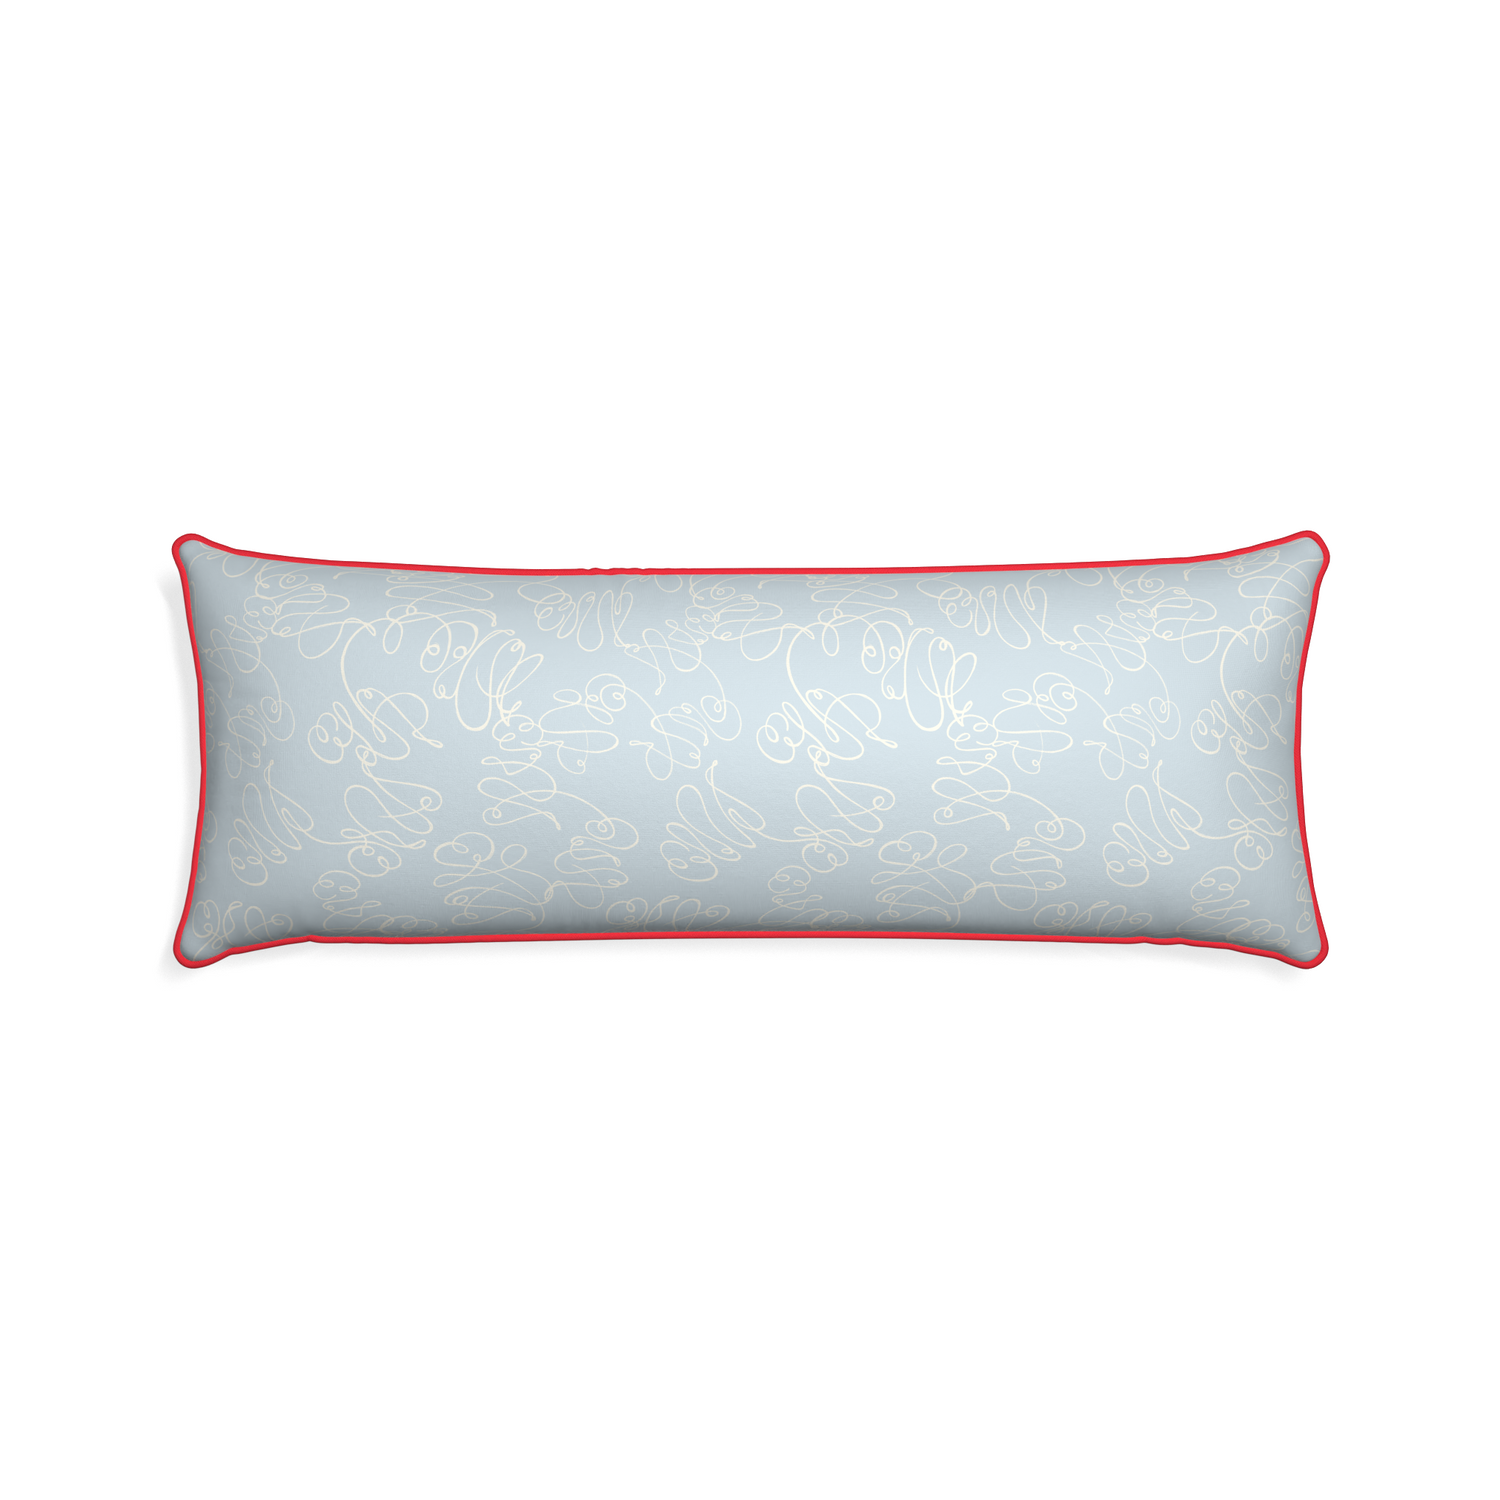 Xl-lumbar mirabella custom pillow with cherry piping on white background